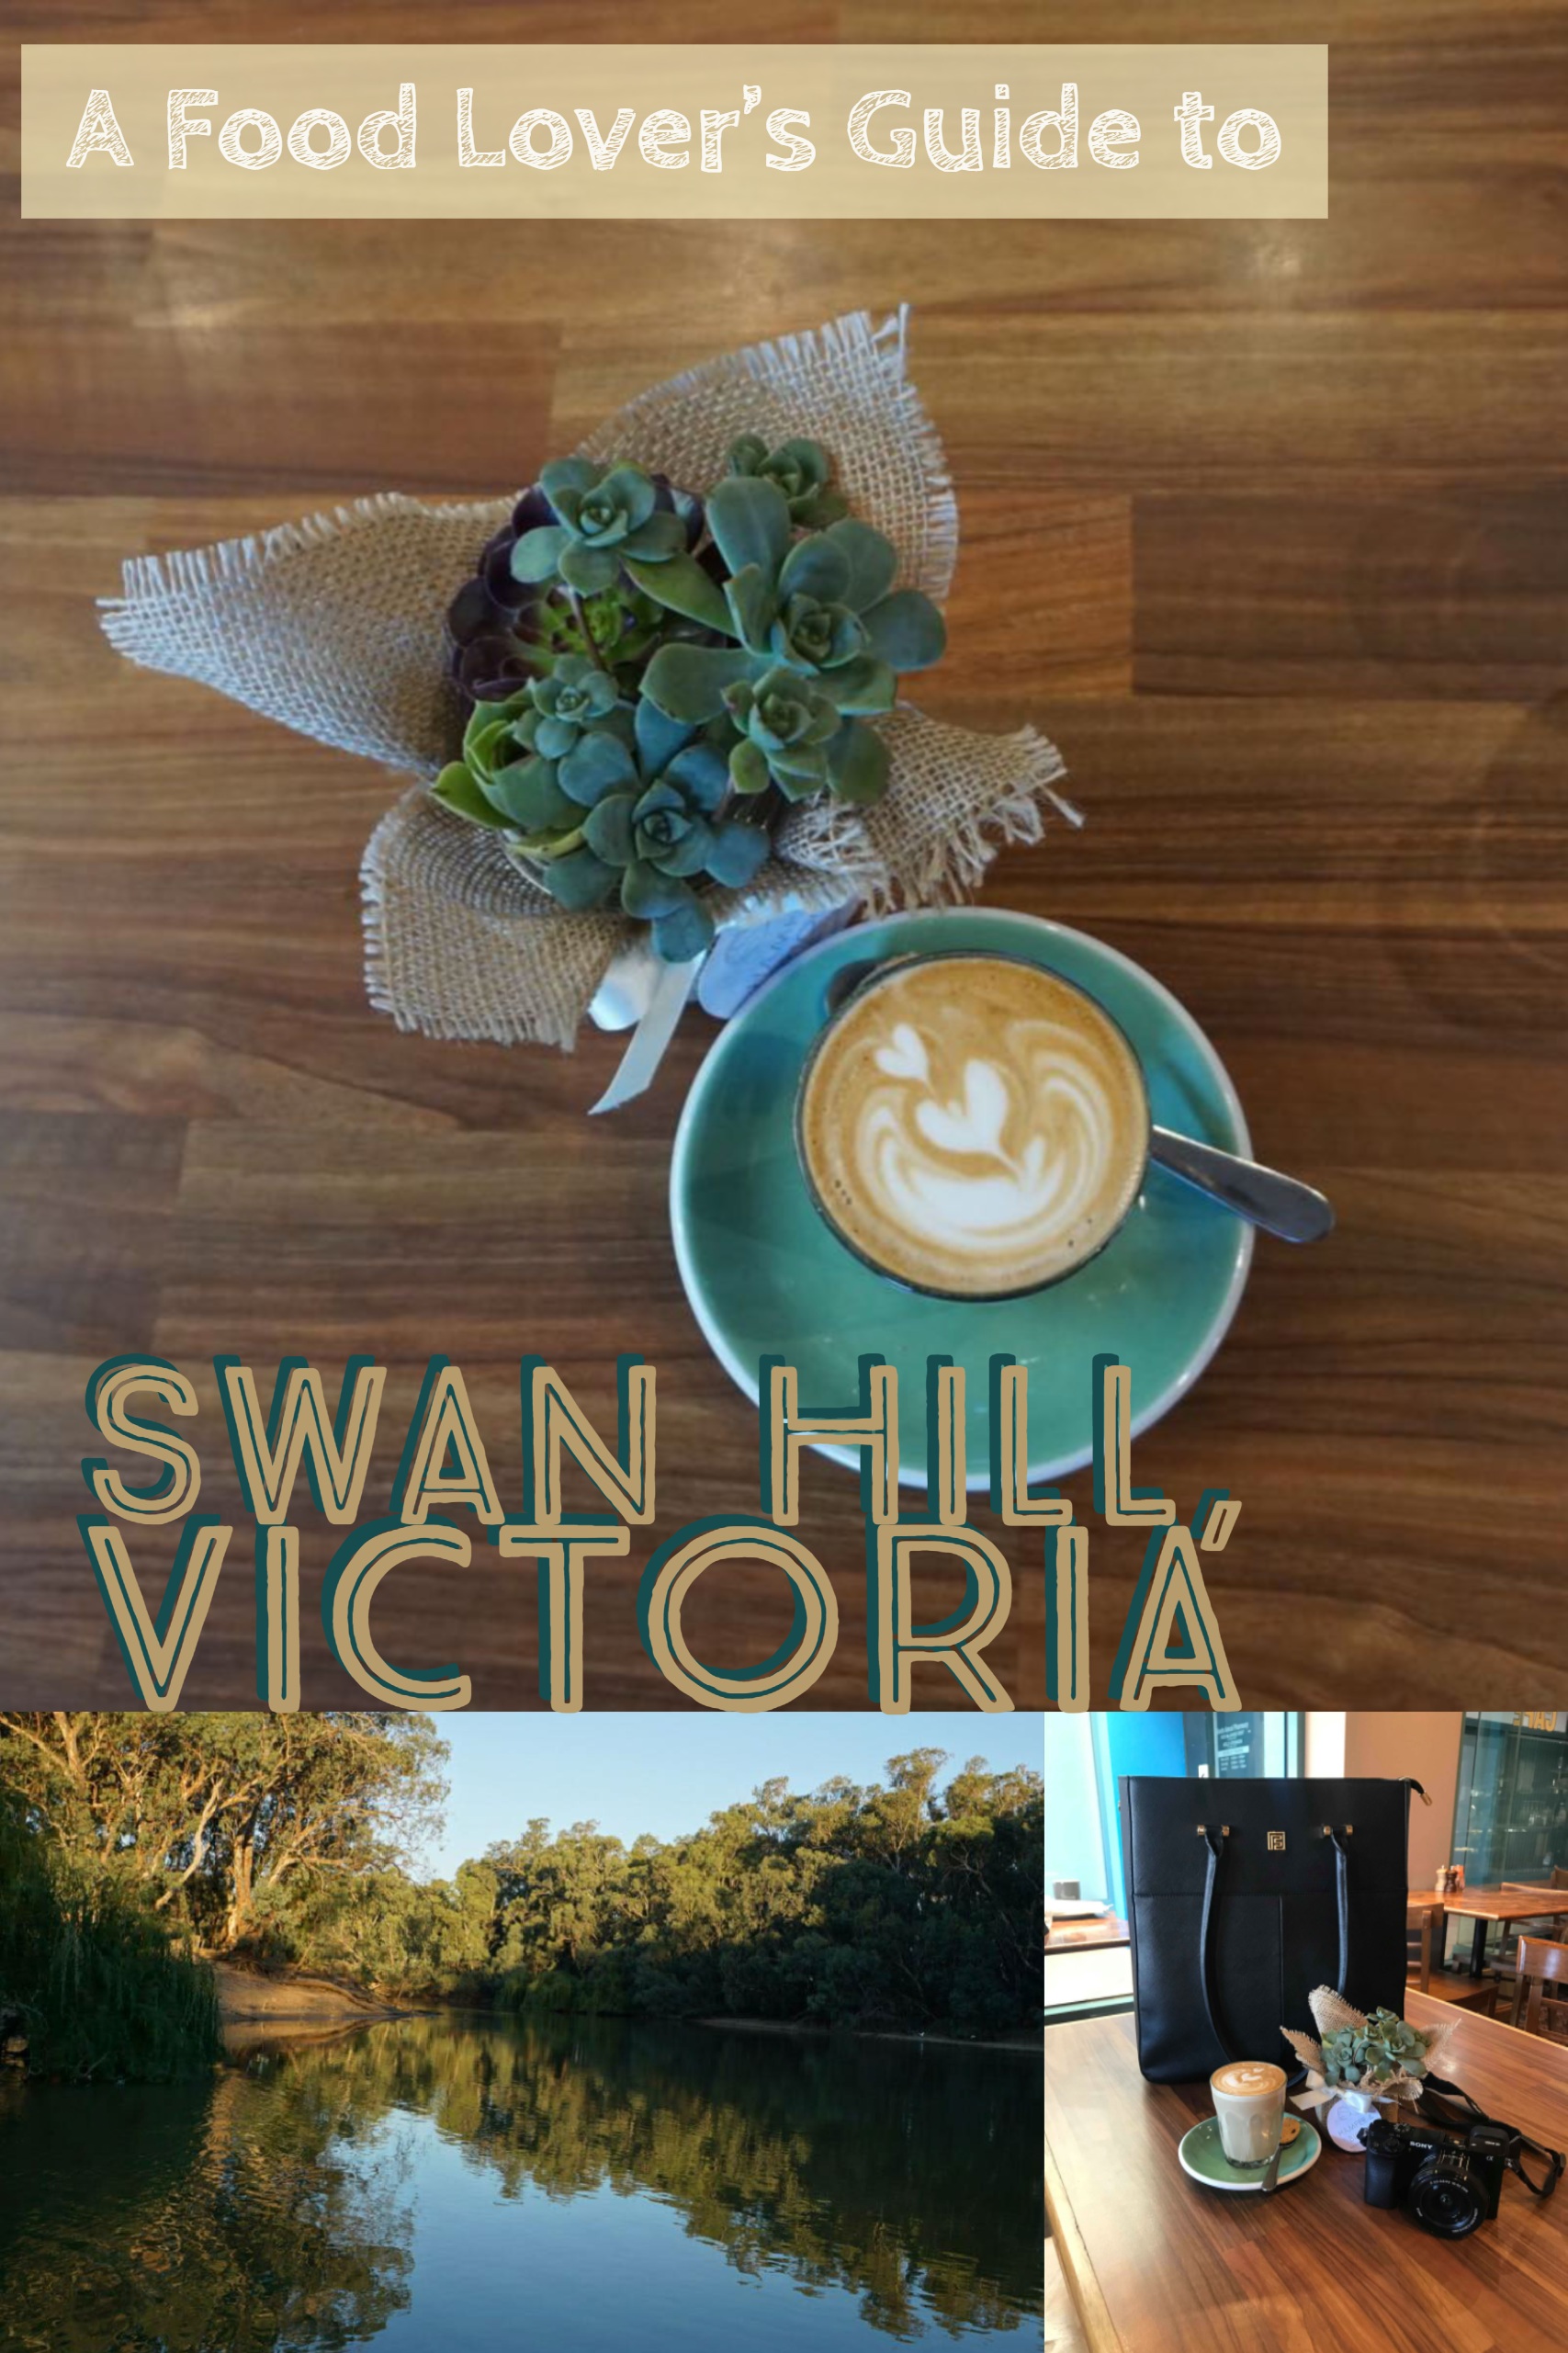 A Food Lover’s Guide to Swan Hill Victoria